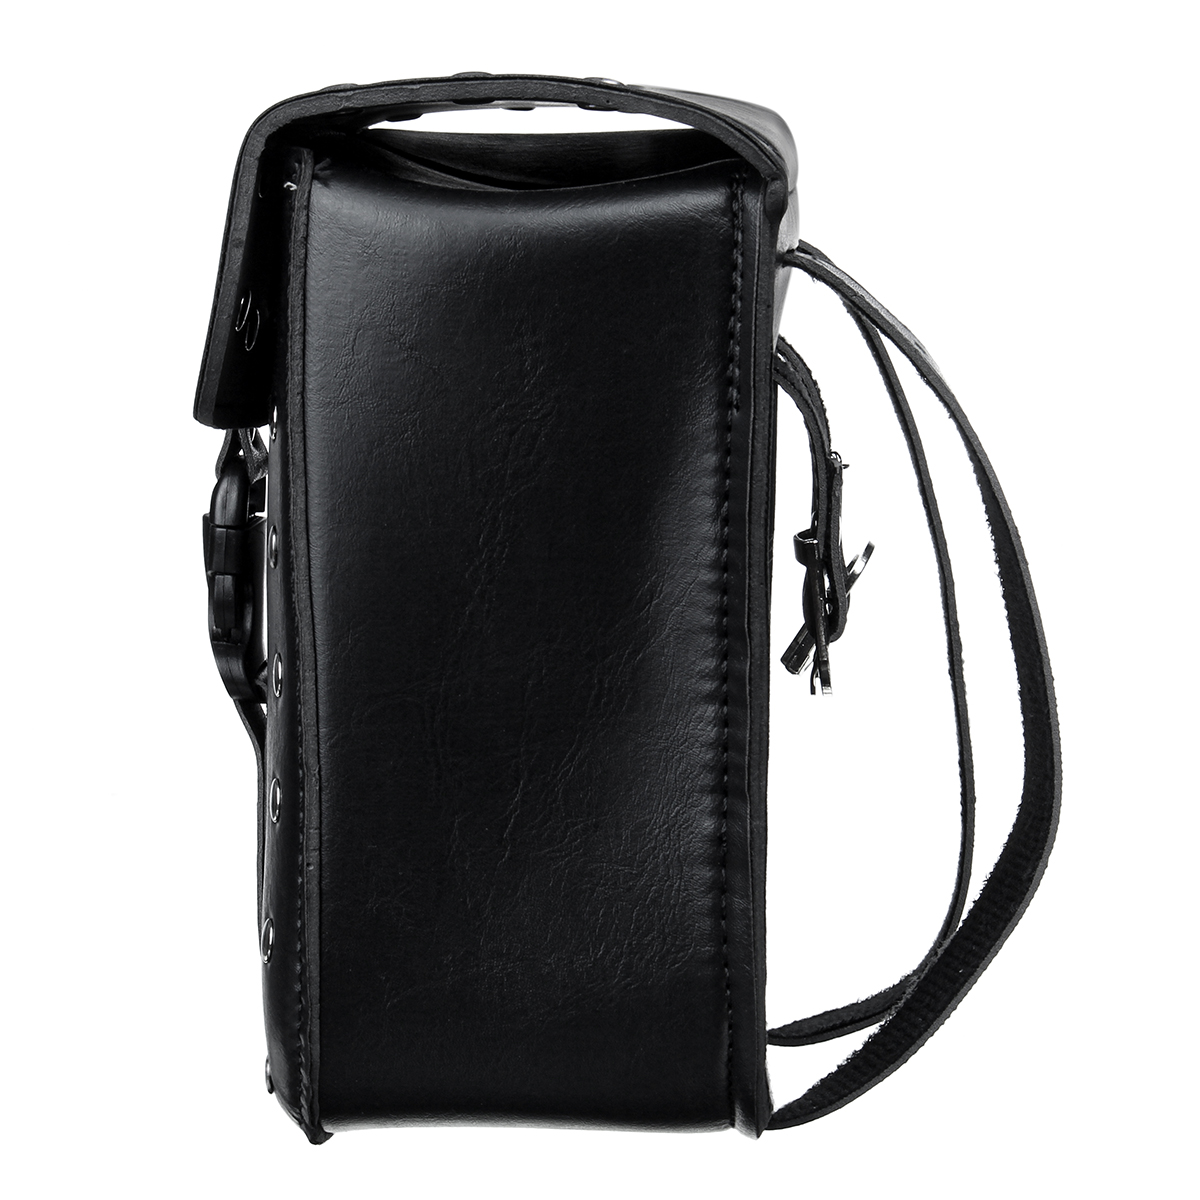 Universal Motorcycle Front Rear Fork Tool Pouch Side Bag Saddlebag PU Leather for Harley Honda